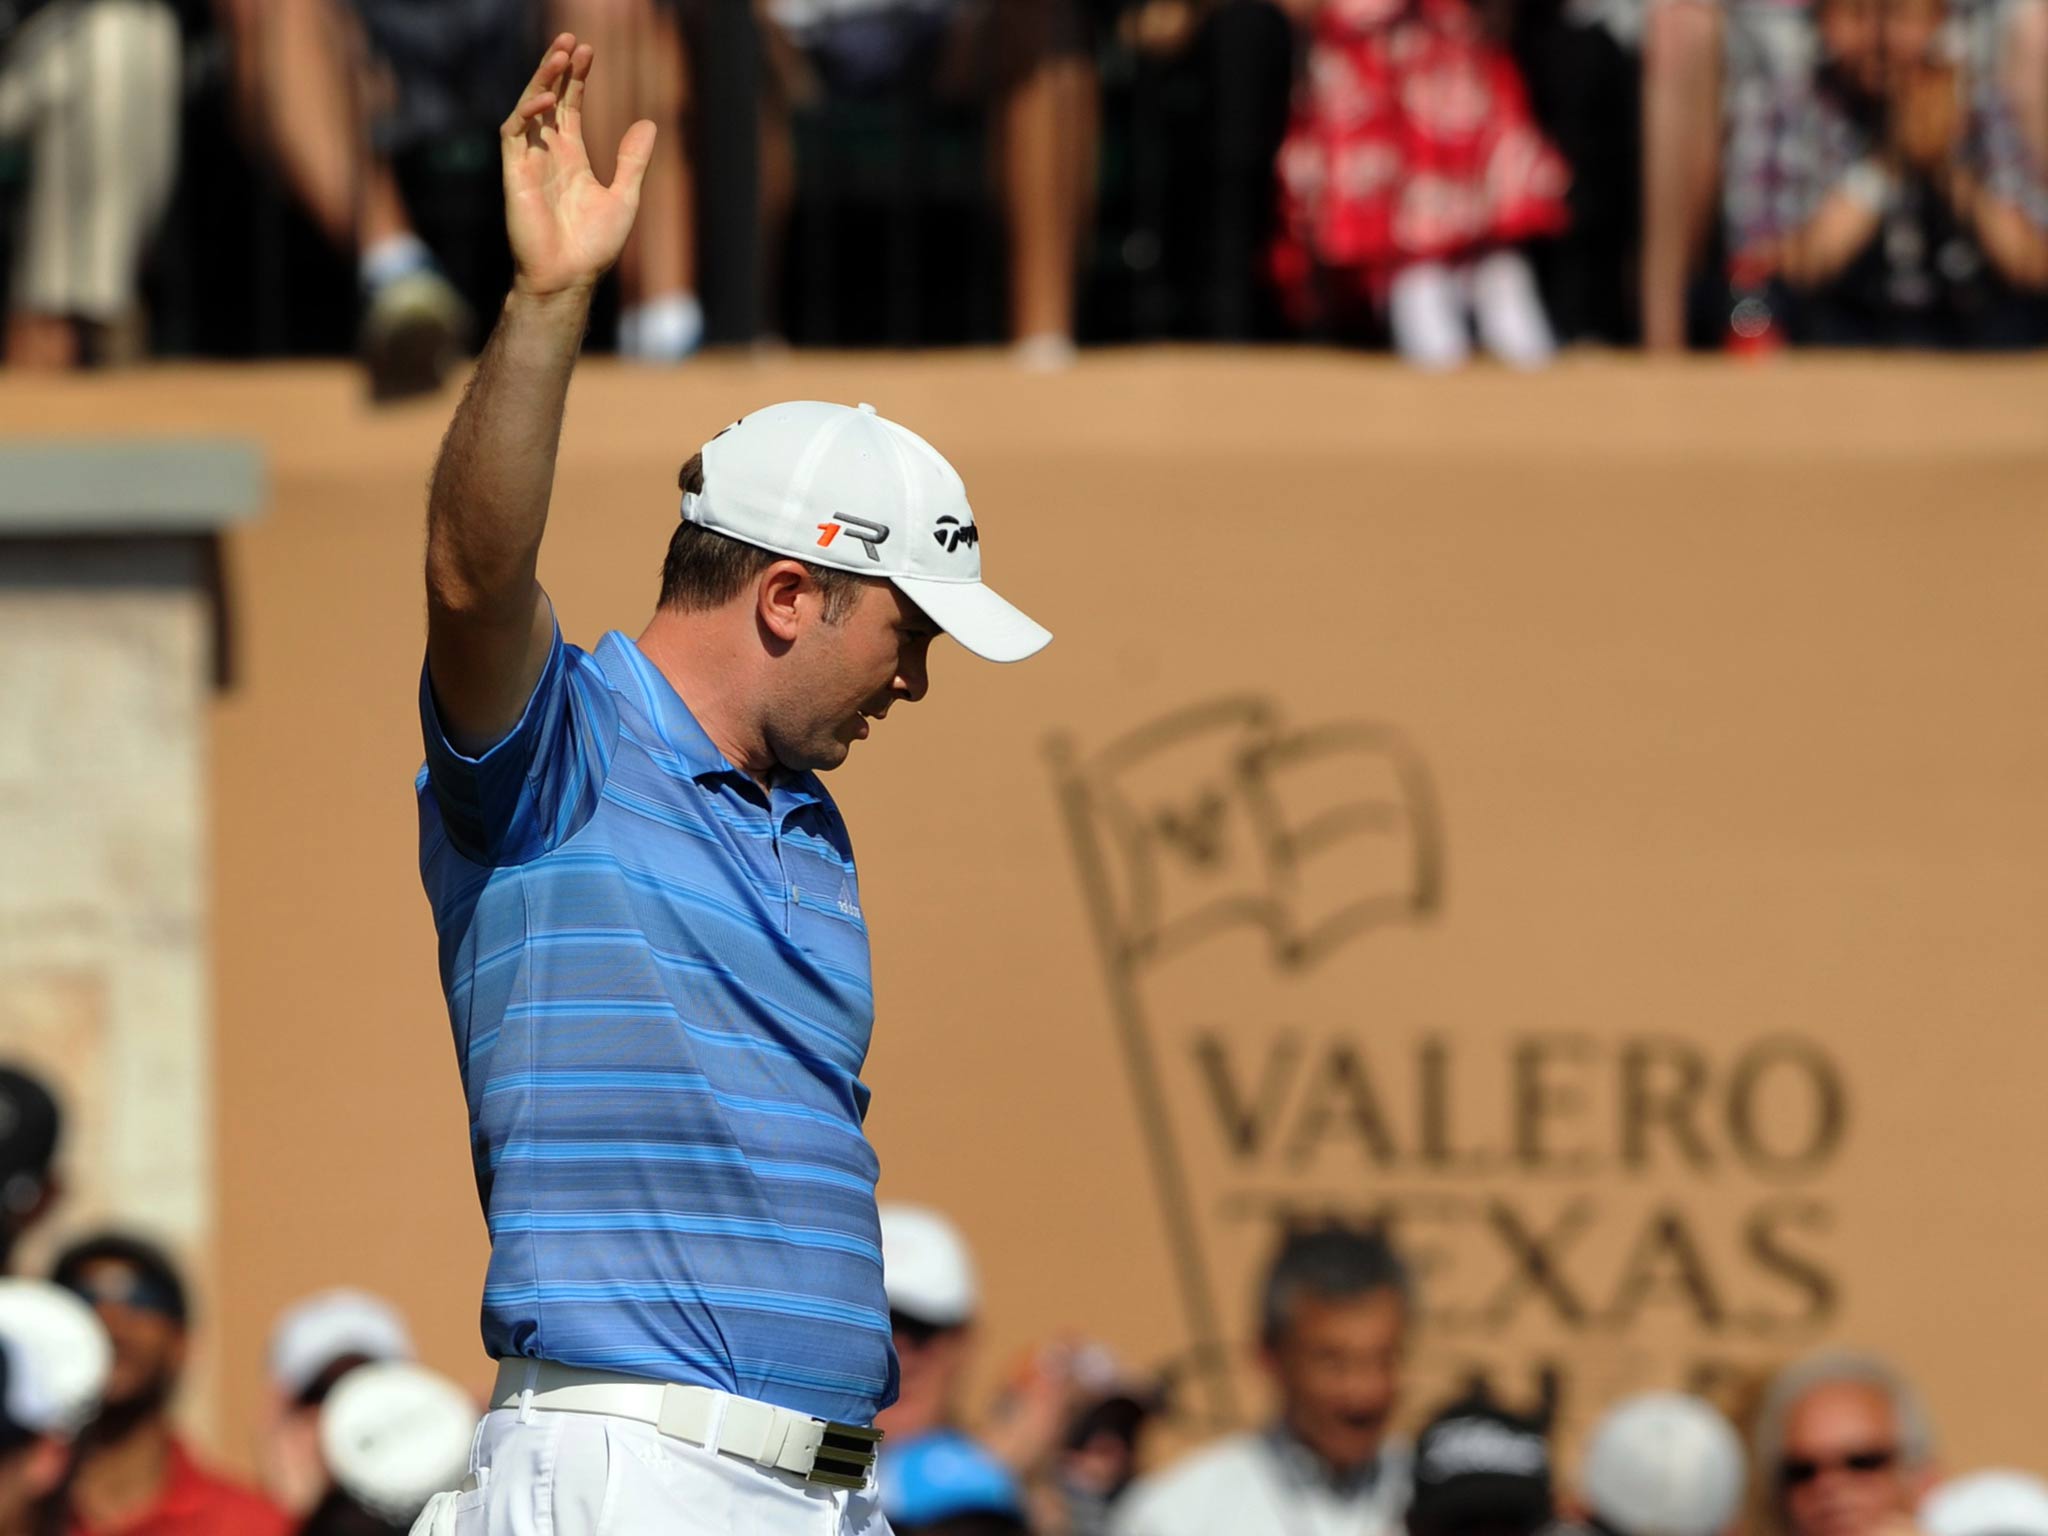 Scottish golfer Martin Laird celebrates victory at the Texas Open